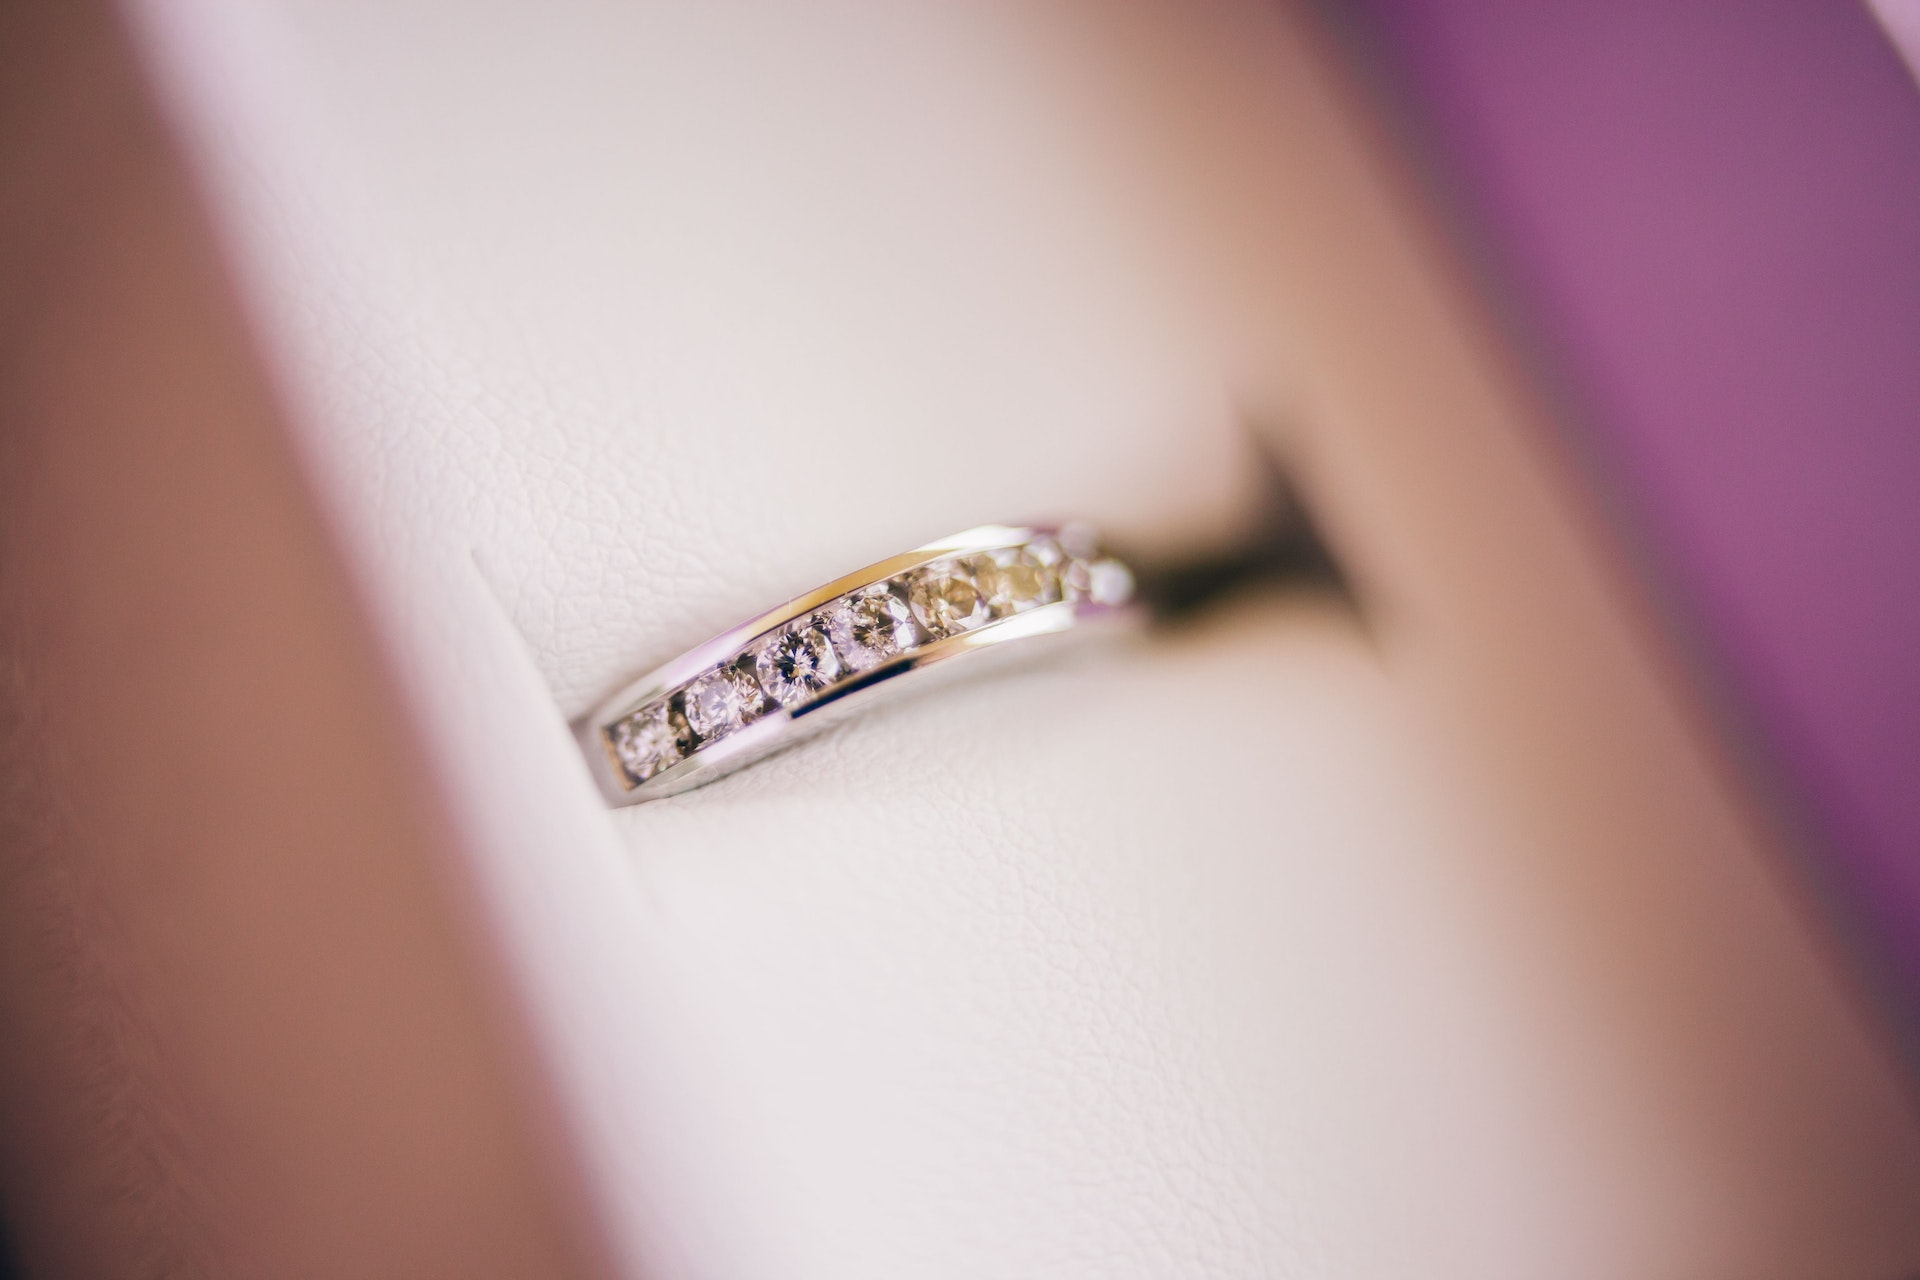 Adding Meaningful Elements To Women's Wedding Rings